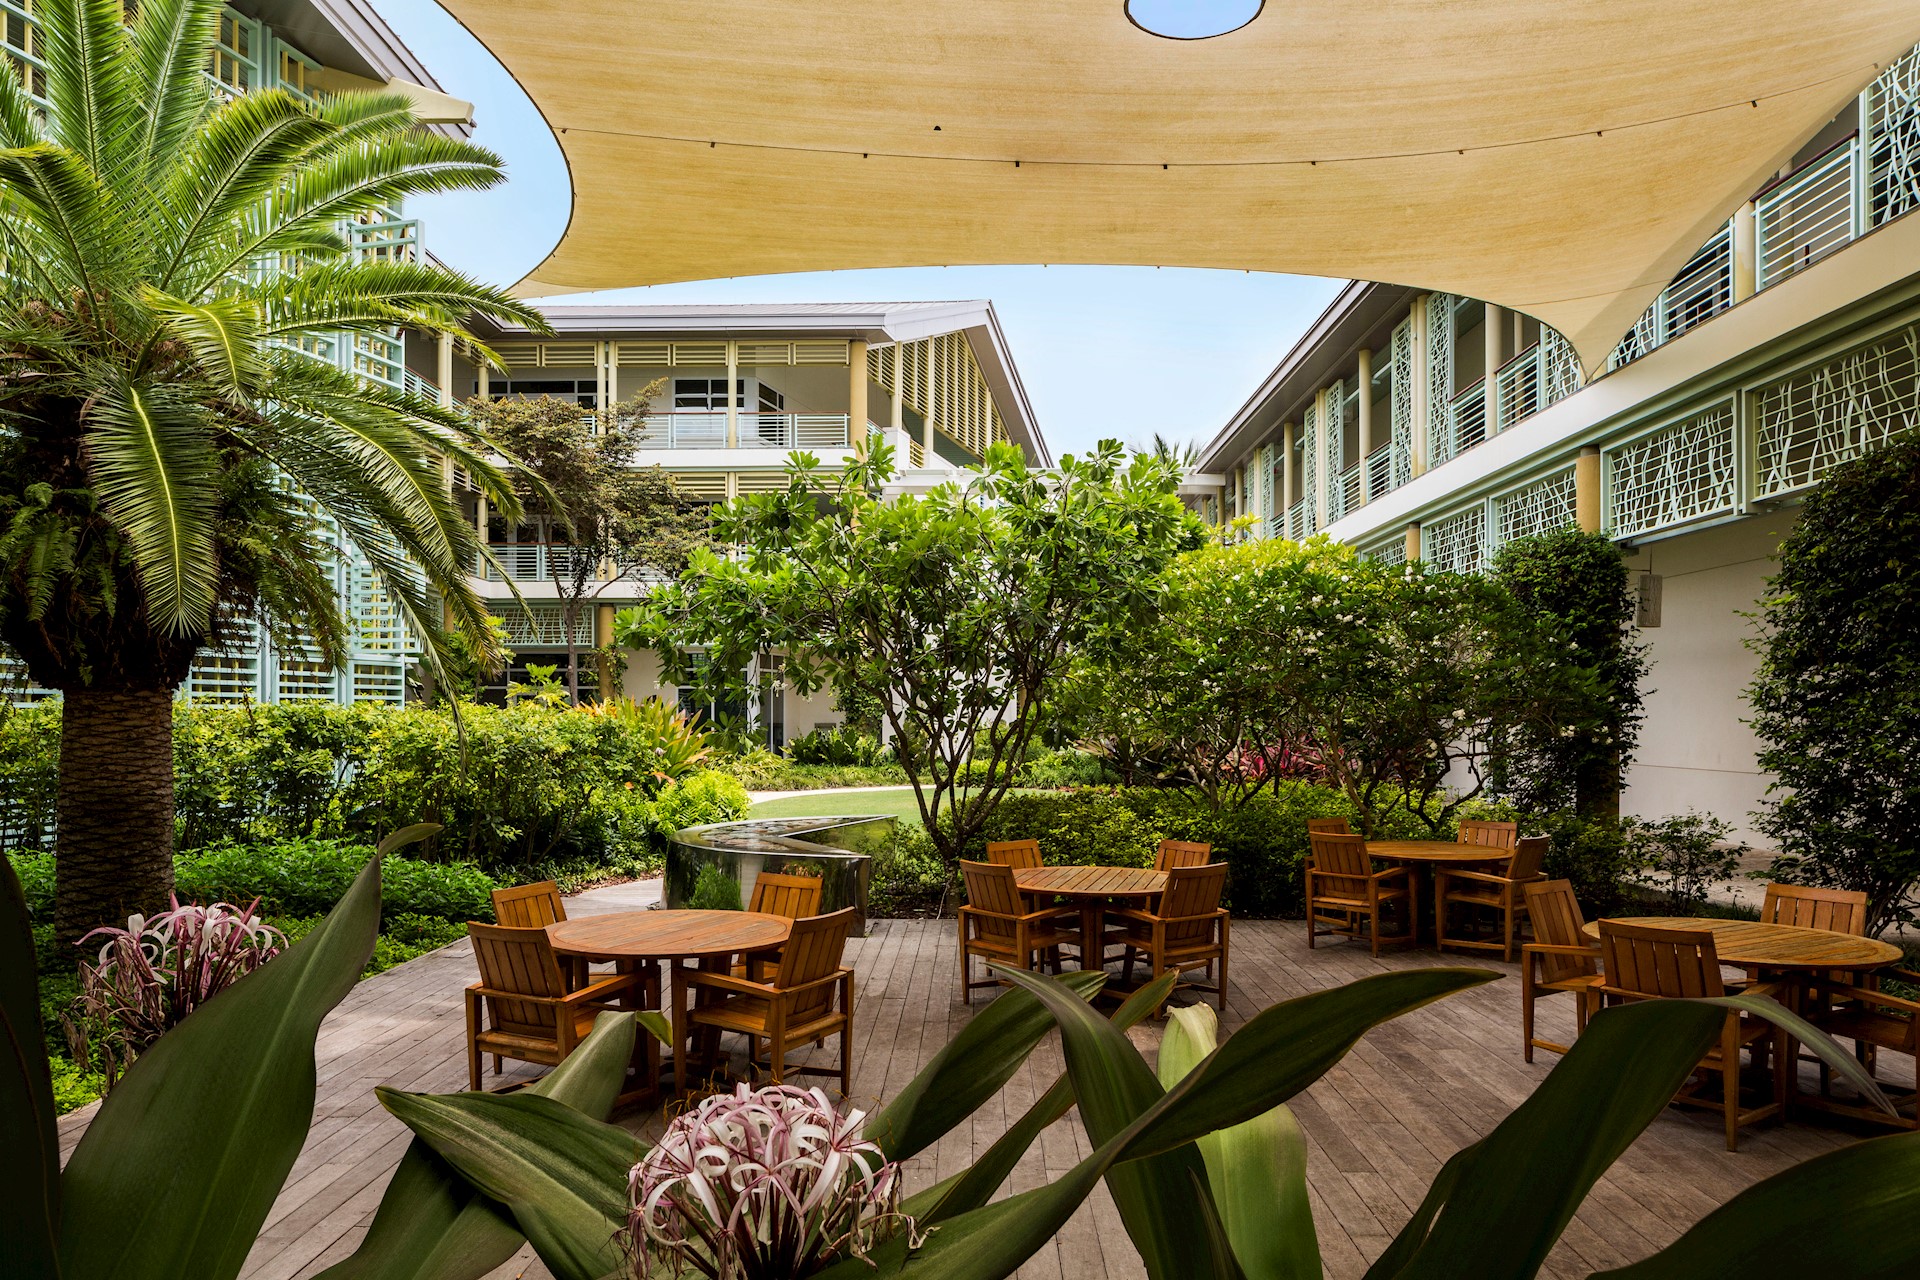 Did you know: A tour around Camana Bay’s five courtyards